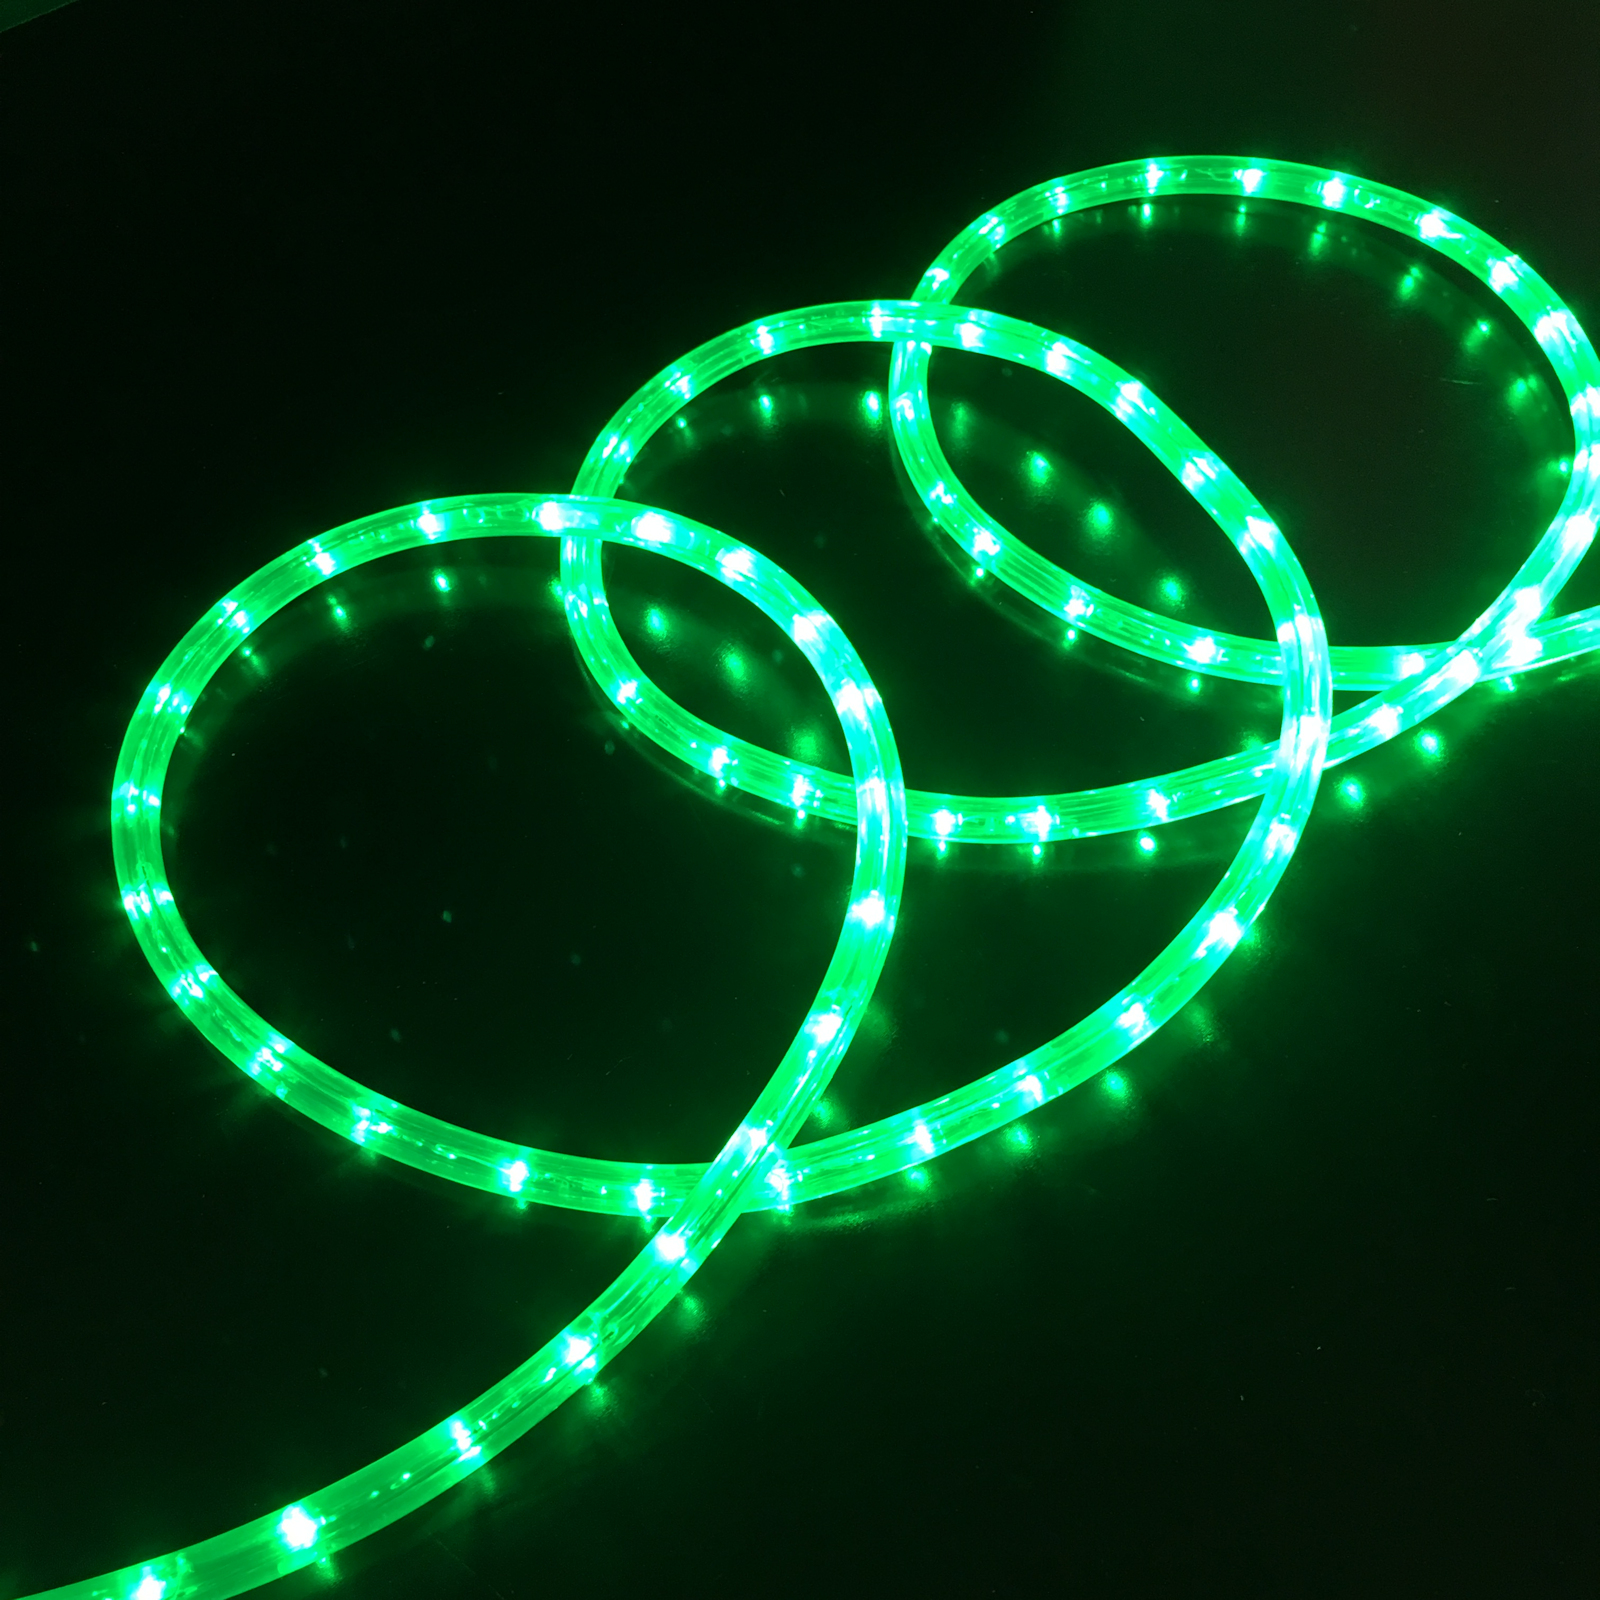 Buy New LED Rope Light 12 Volt GREEN 15 metres online from Christmas ...